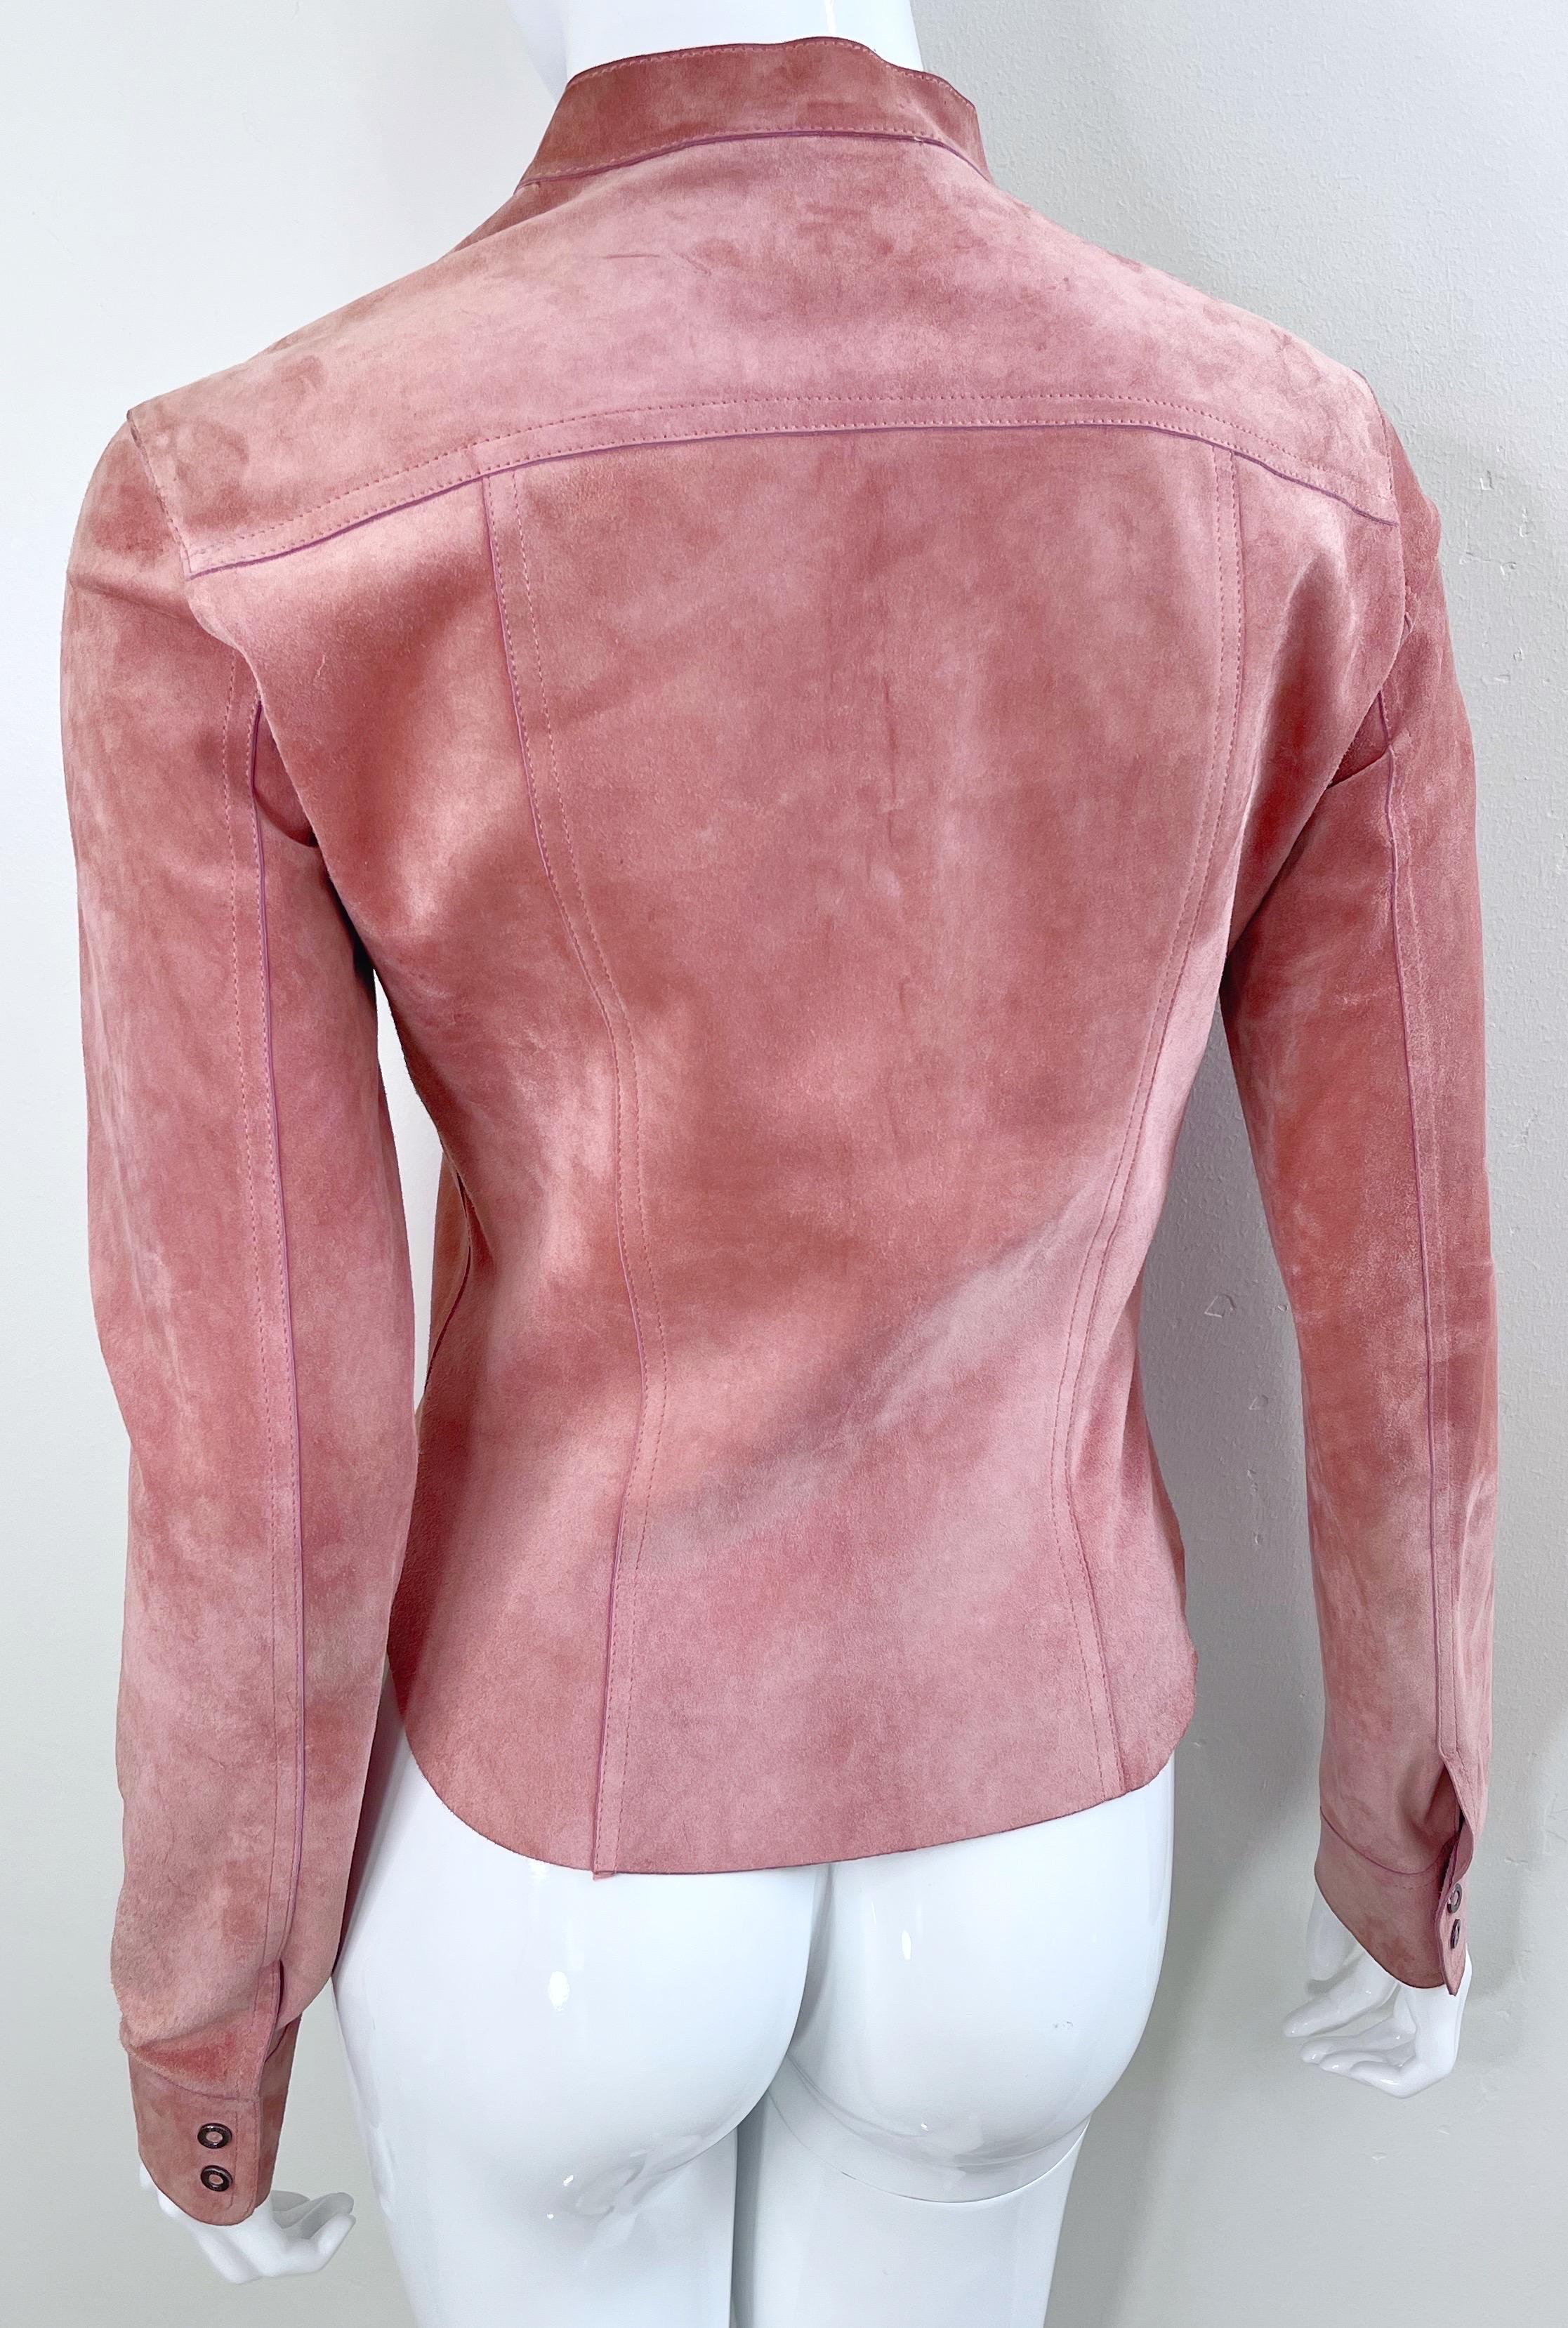 Gucci by Tom Ford Pink Mauve Dusty Rose Suede Leather Vintage Jacket  3